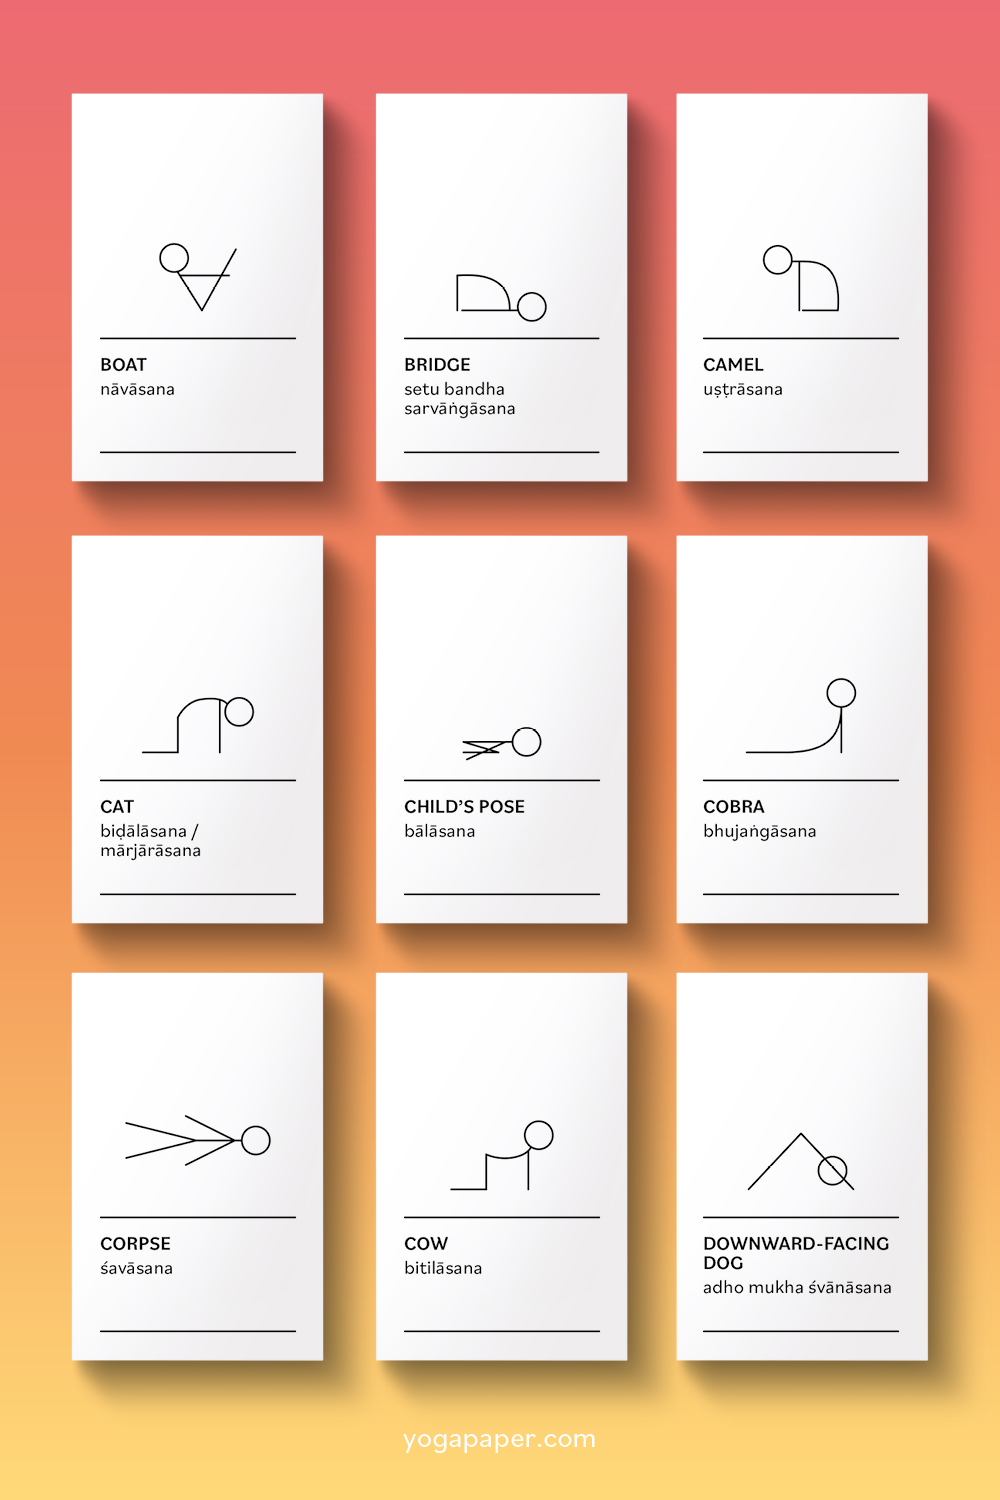 Printable Yoga Cards With Stick-Figures - Yoga Paper